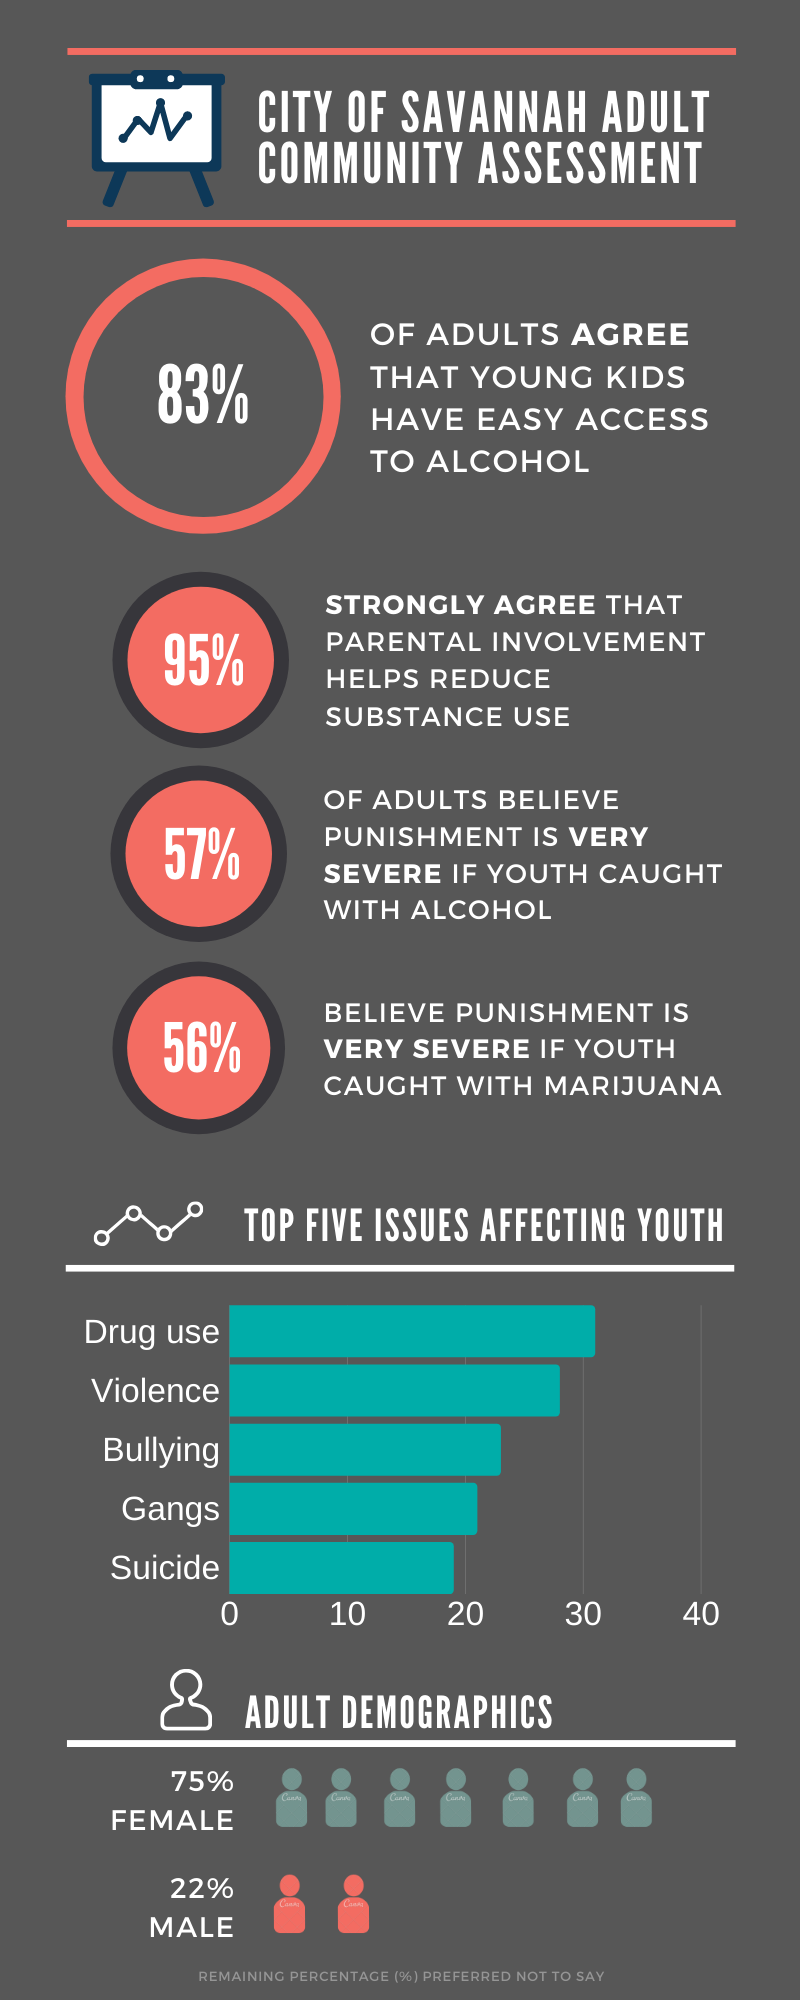 Infographic. 83% of adults in Savannah agree that young kids have easy access to alcohol. 95% strongly agree that parental involvement helps reduce substance abuse. 57% believe punishment is very severe if youth are caught with alcohol. 56% believe punishment is very severe if youth are caught with marijuana. Adults in Savannah say the top 5 issues affecting youth are drug use, violence, bullying, gangs, and suicide. 75% of the adults surveyed were female and 22% male.